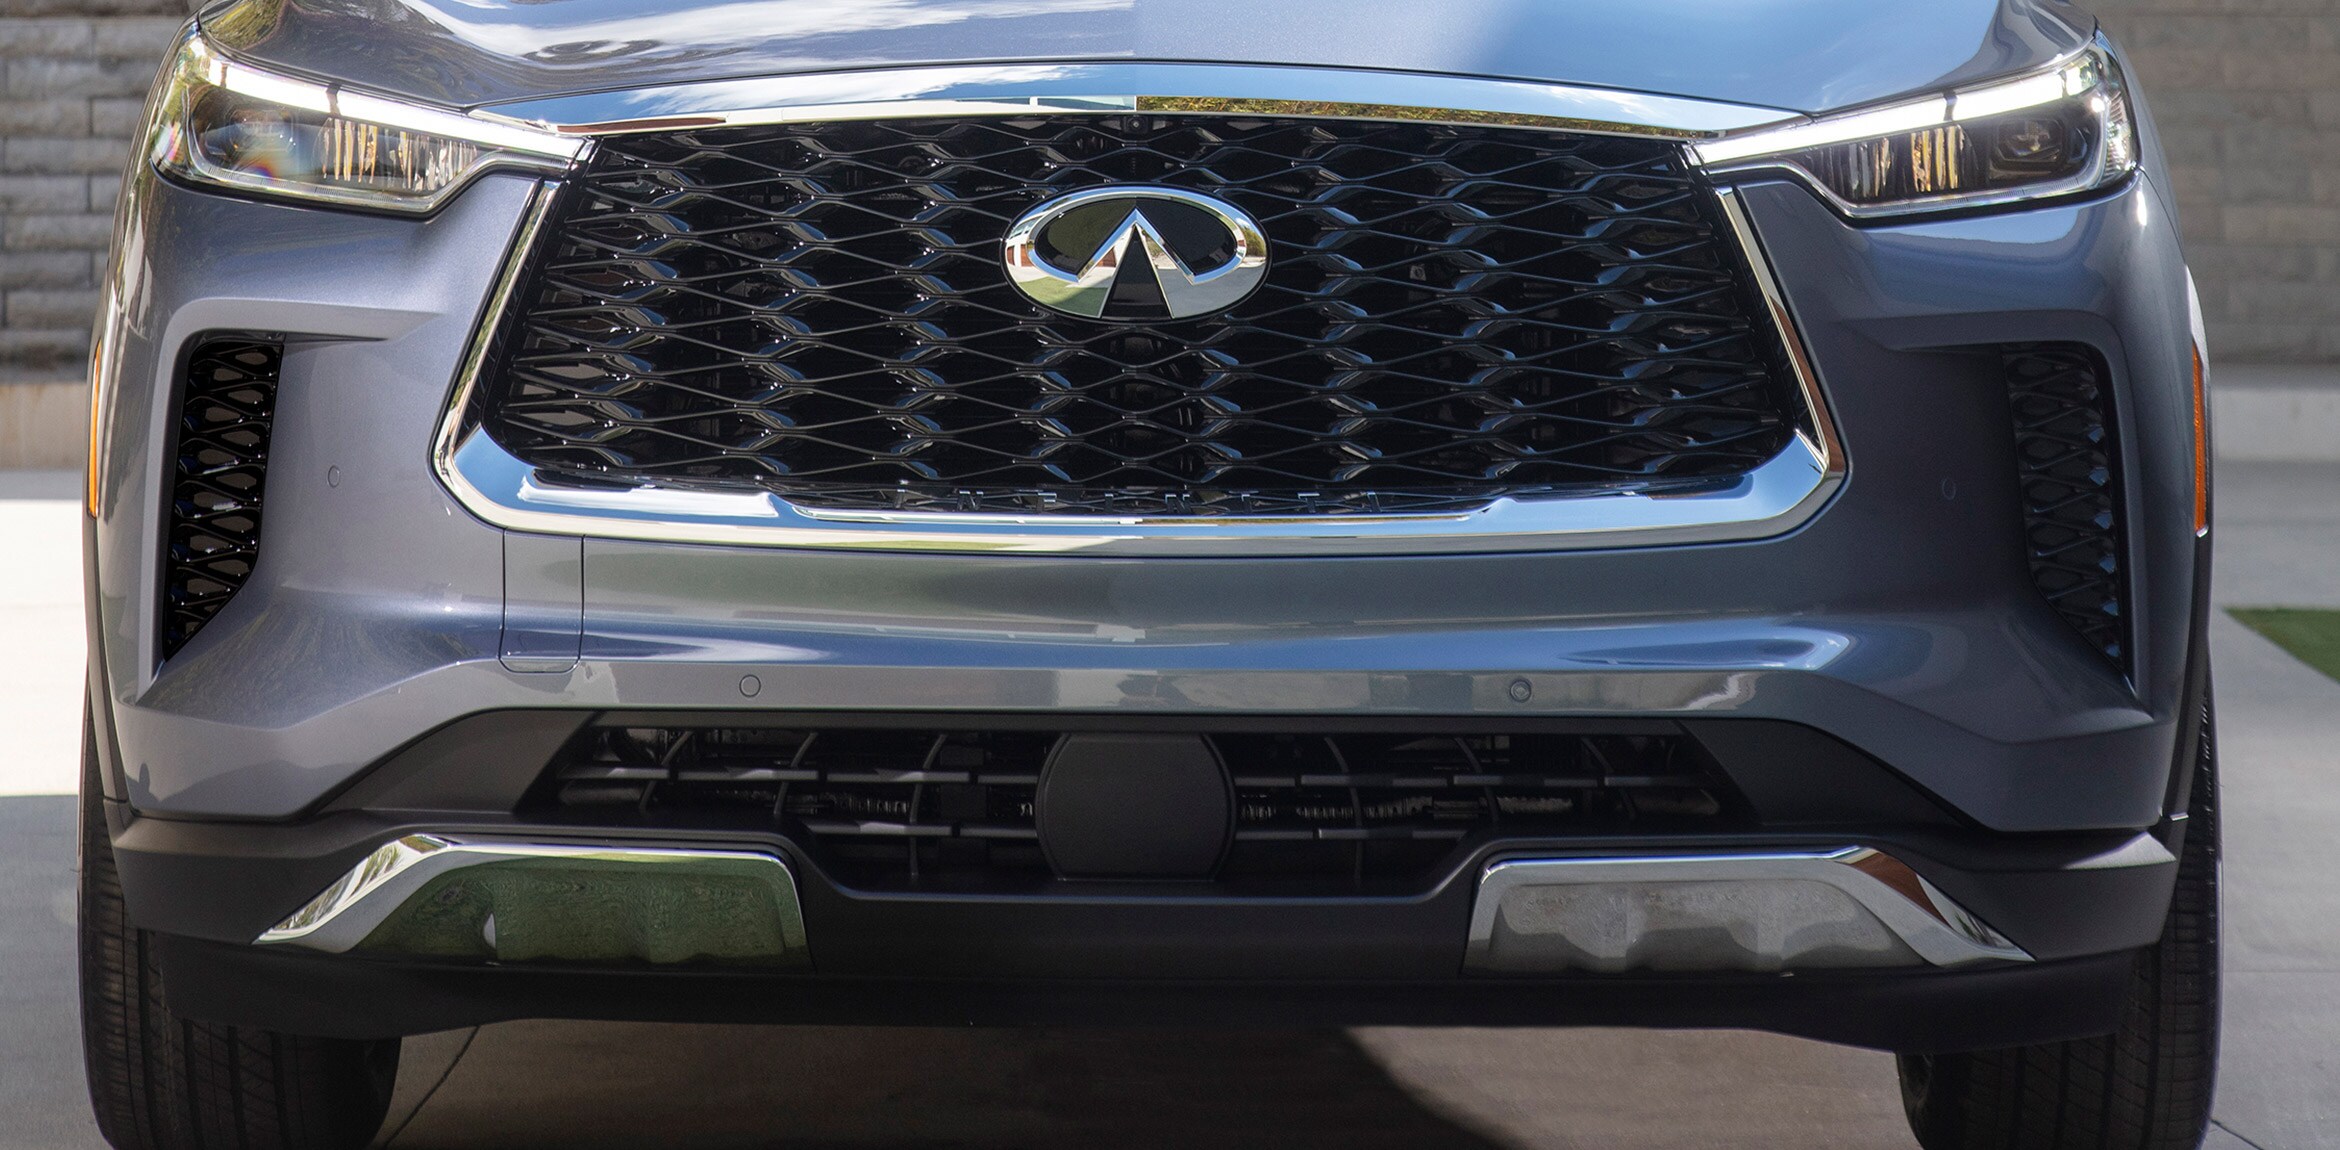 Rear exterior view of 2022 INFINITI QX60 Crossover SUV highlighting LED taillights